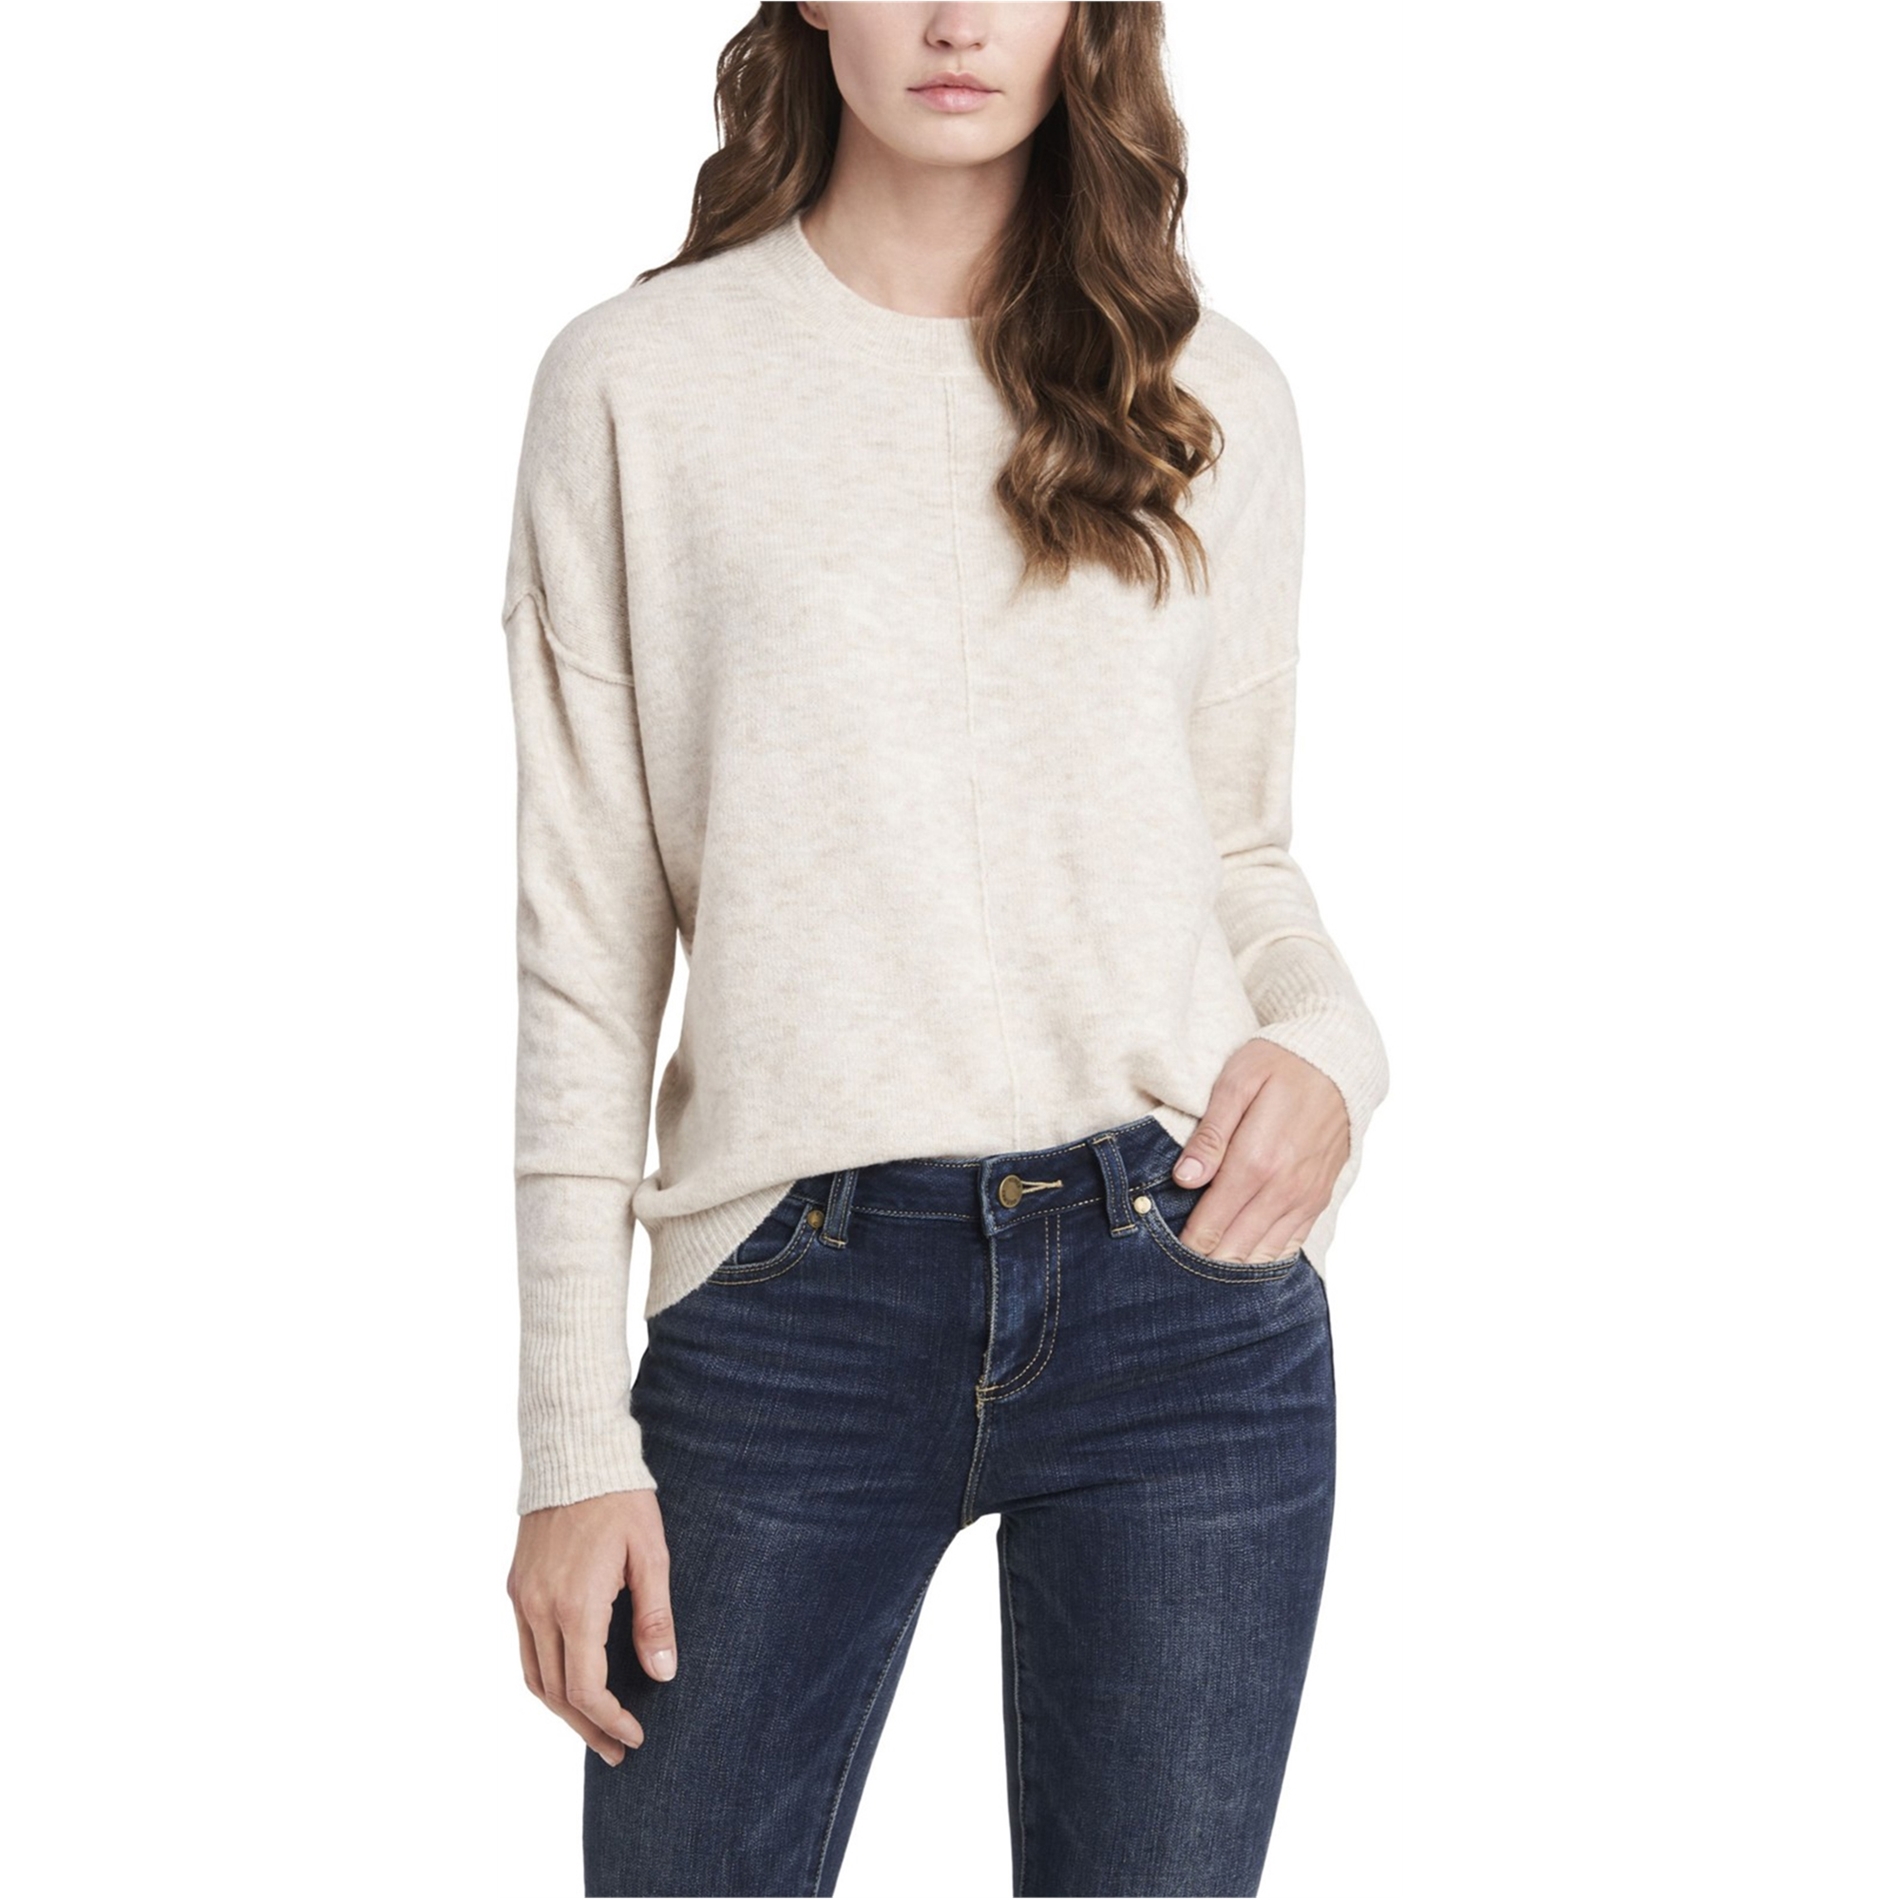 Vince Camuto Womens Cozy Pullover Sweater